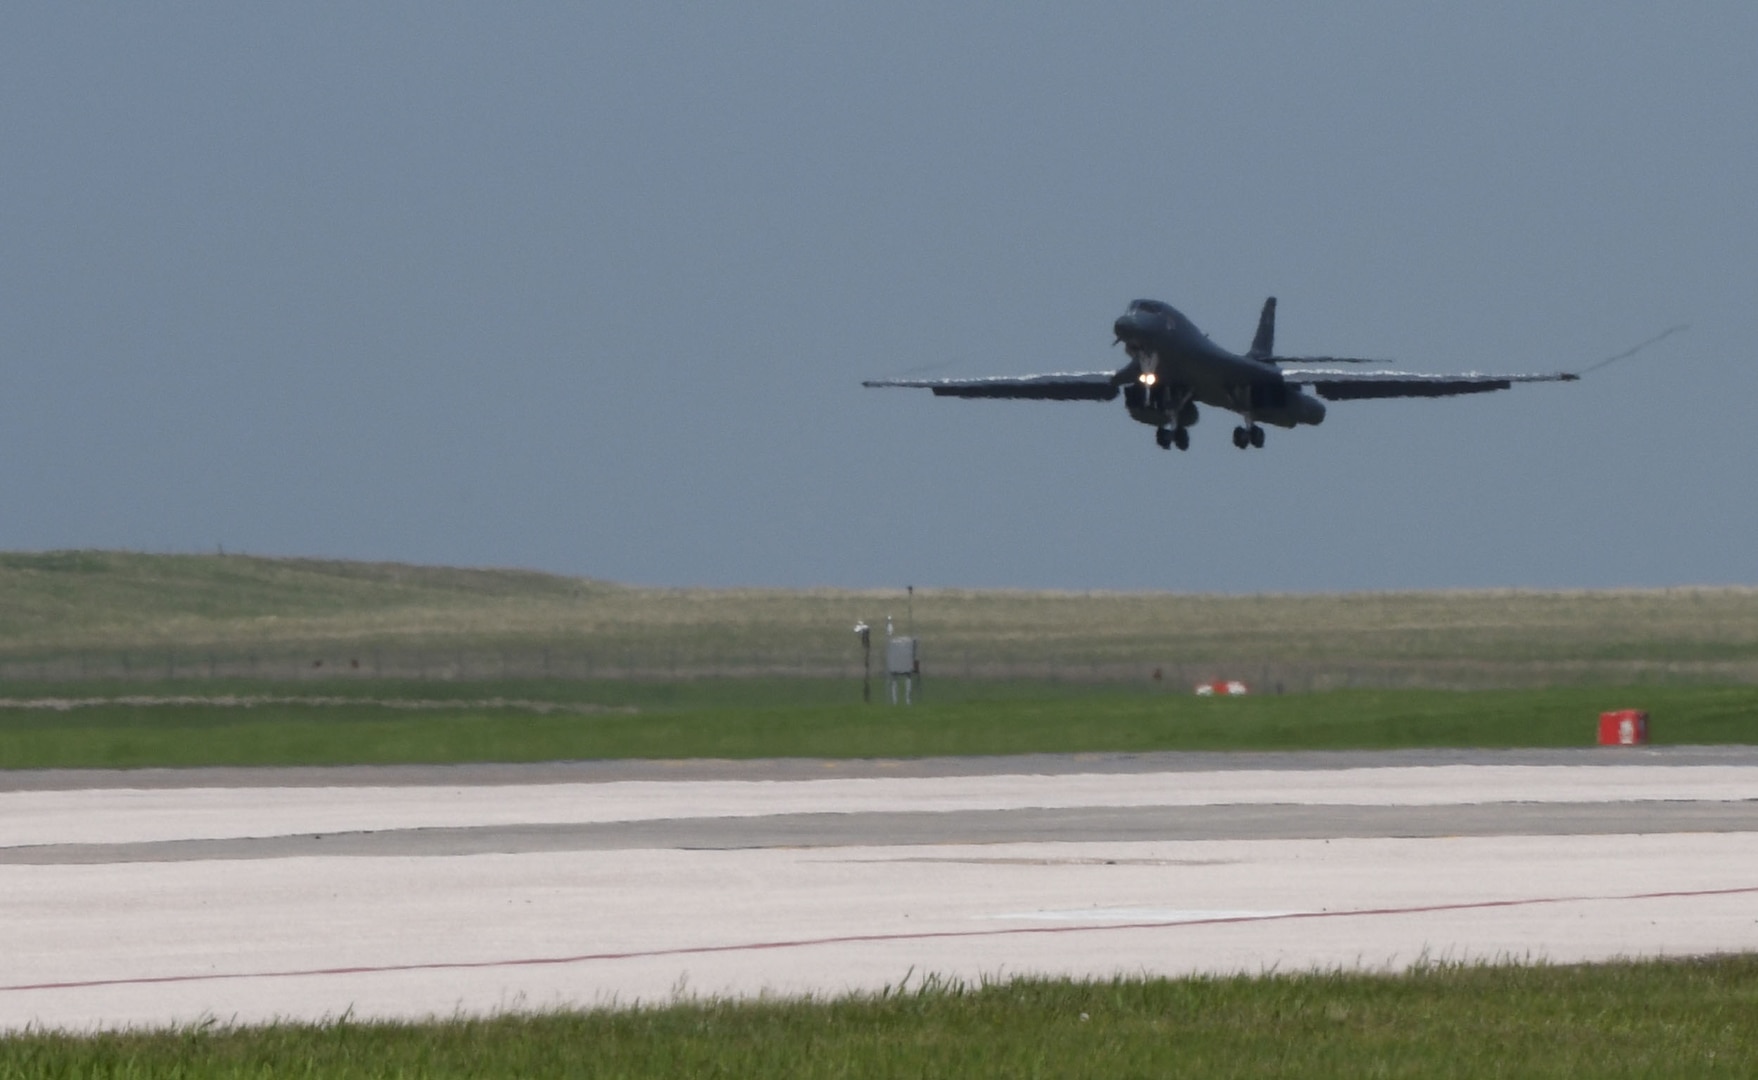 A 34th Bomb Squadron B-1B Lancer lands at Ellsworth Air Force Base, S.D., May 20, 2020, following their support of a Bomber Task Force mission to the U.S. European Command area of responsibility. These long-range, long-duration B-1 missions demonstrate the U.S. Air Force’s global strike capacity and ability to deliver precision-guided ordnance against any adversary - anytime, anywhere. (U.S. Air Force photo by Airman 1st Class Christina Bennett)